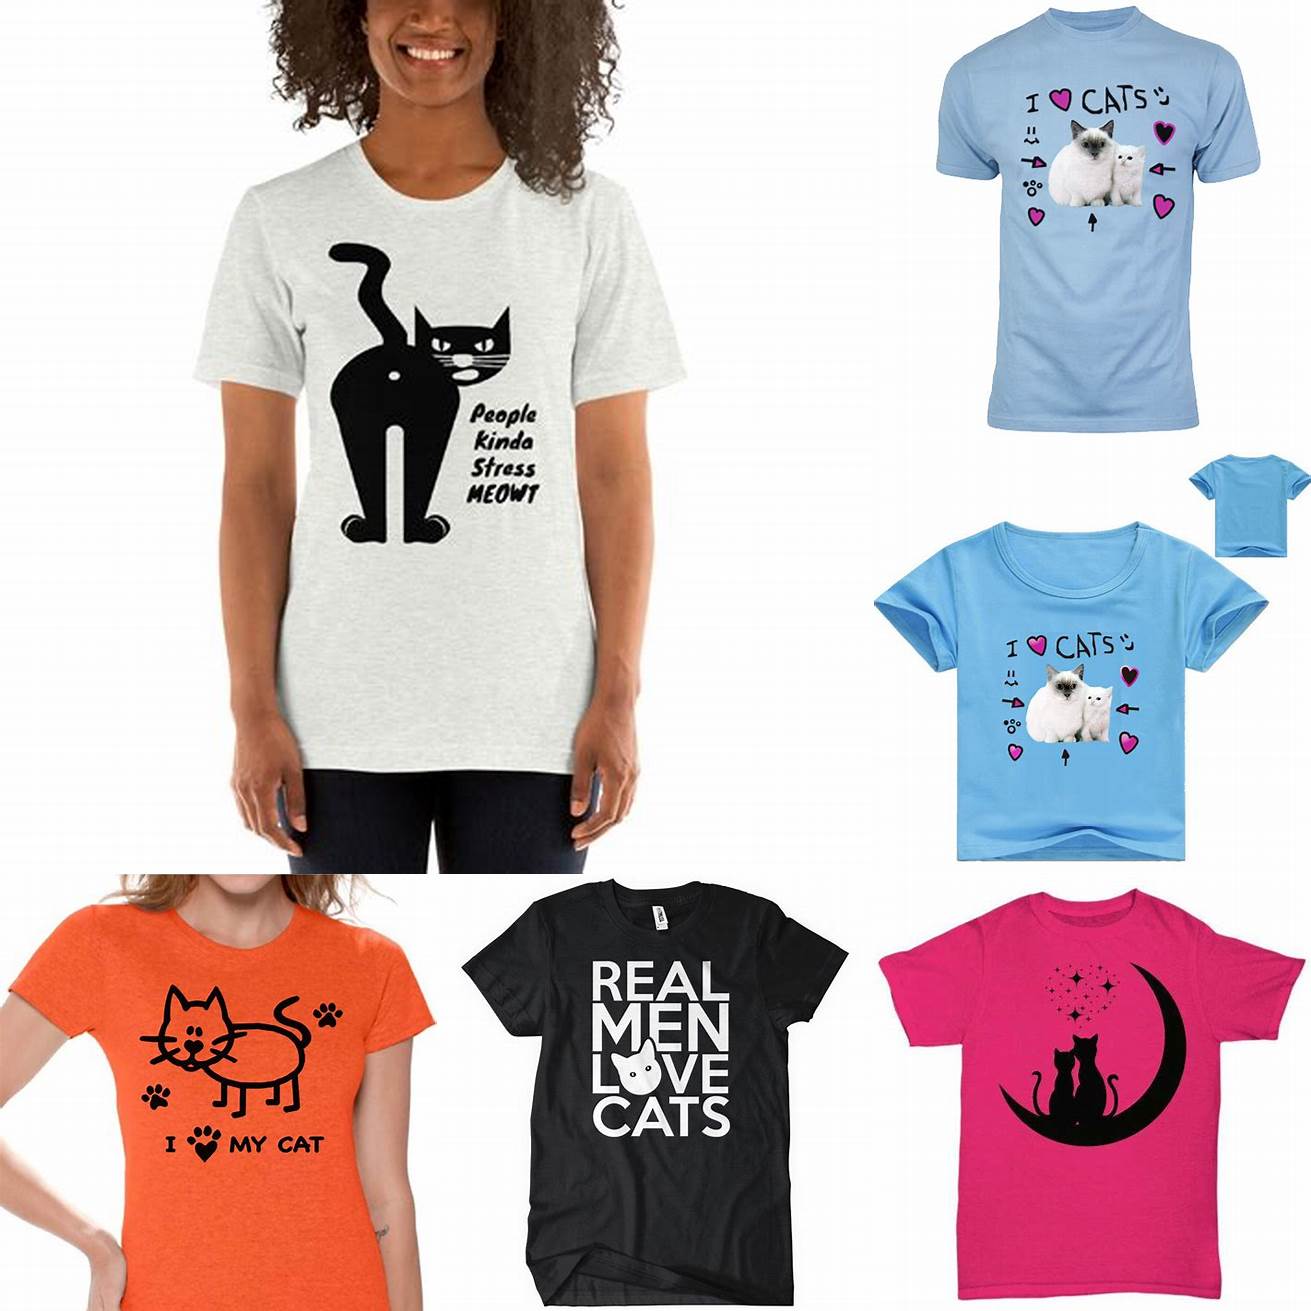 Cat Love T-Shirt on a Sunny Day